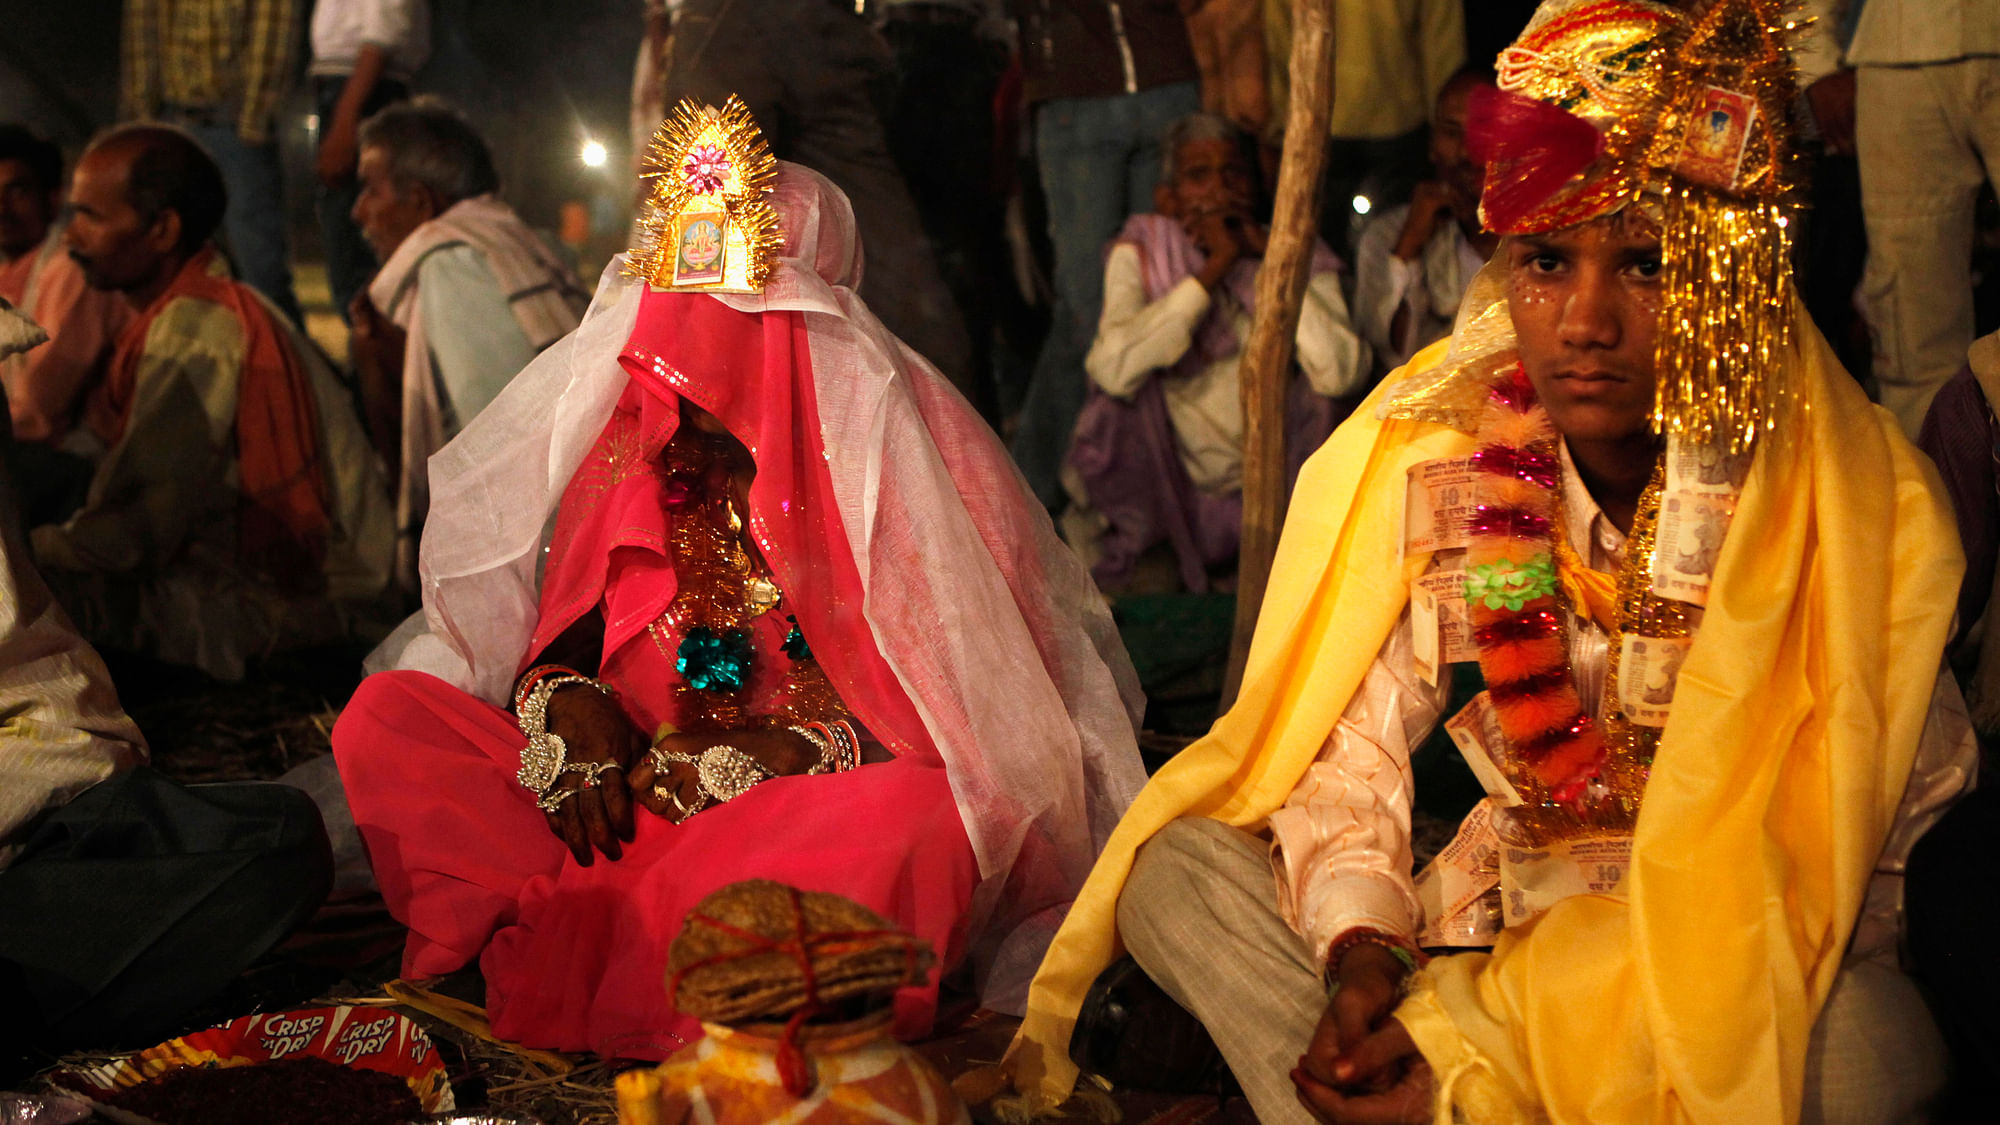 The minor girl alerted the authorities after her family attempted to marry her off. Image used for representational purposes. (Photo: Reuters)